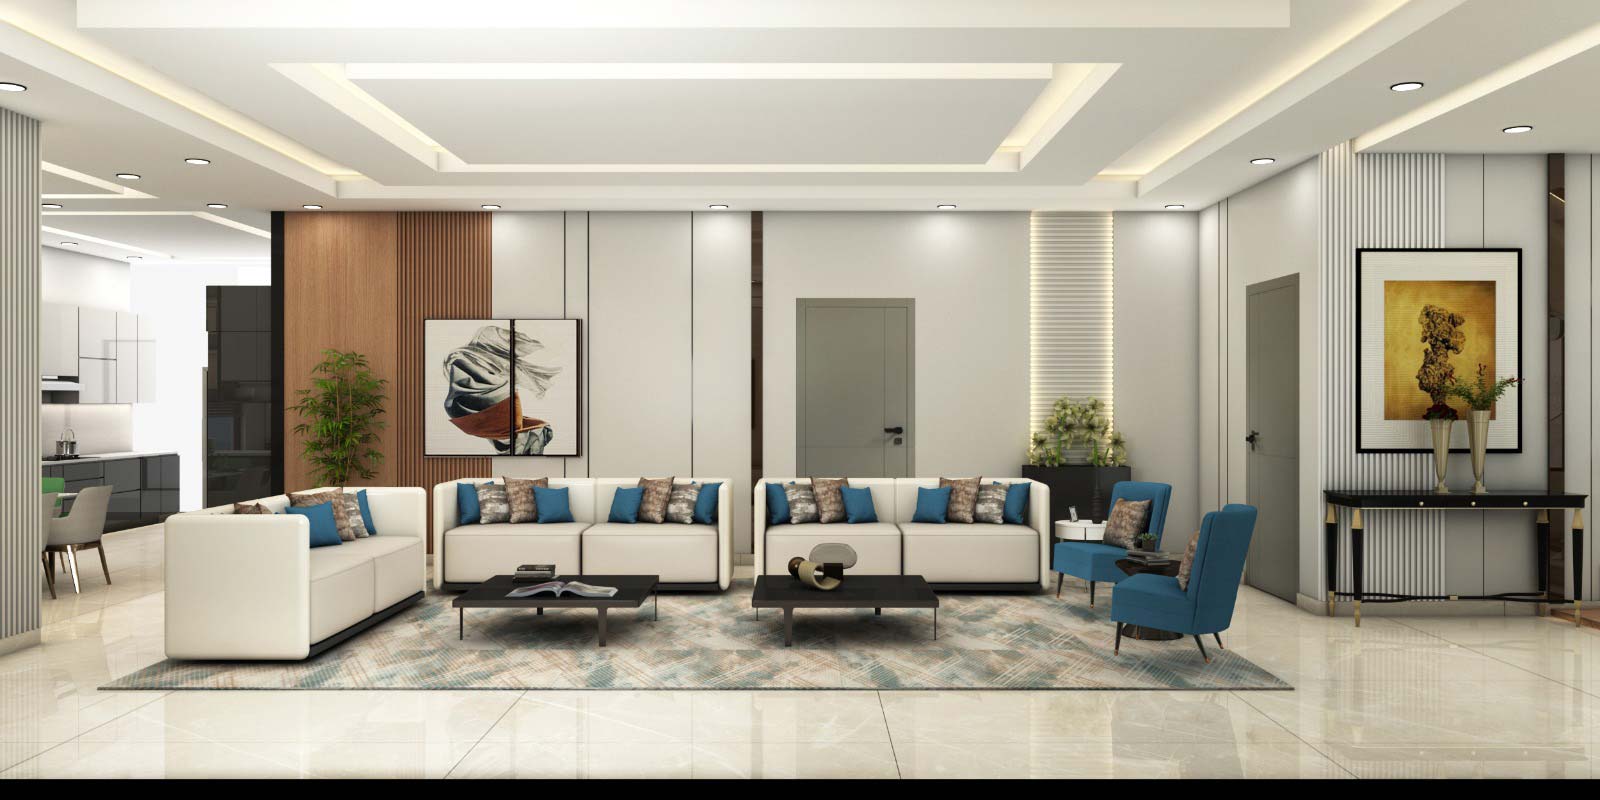 Modern living room interior designed by Designers Gang featuring a white couch, blue accent chairs, a round coffee table with a black metal base, a woven rug with geometric shapes, and a statement pendant lamp. Large windows provide natural light.